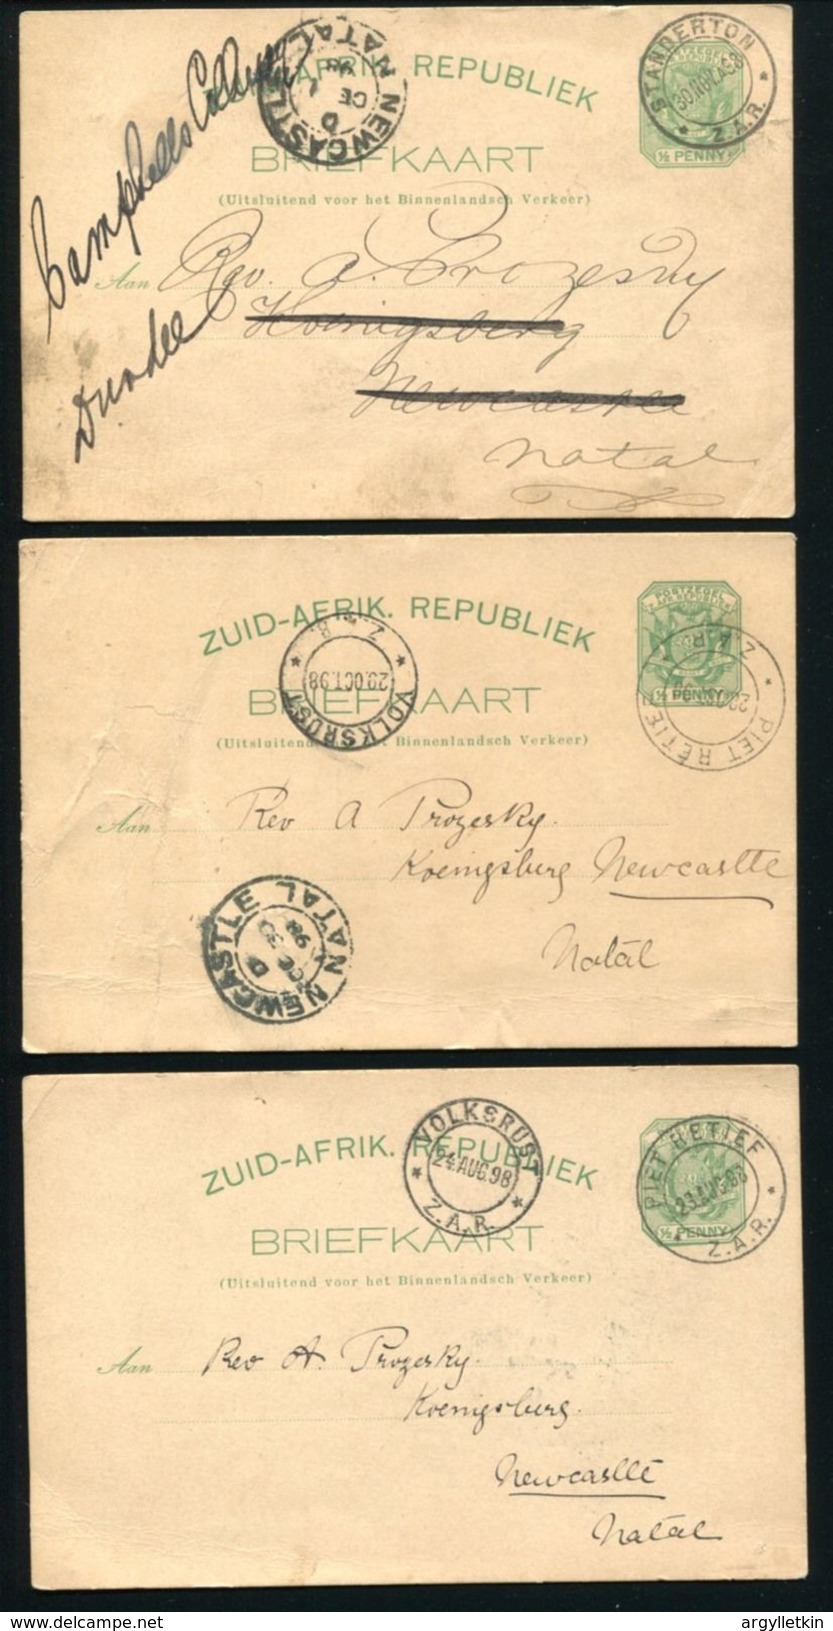 SOUTH AFRICAN REPUBLIC STATIONERY STANDERTON PIET RETIEF - Unclassified